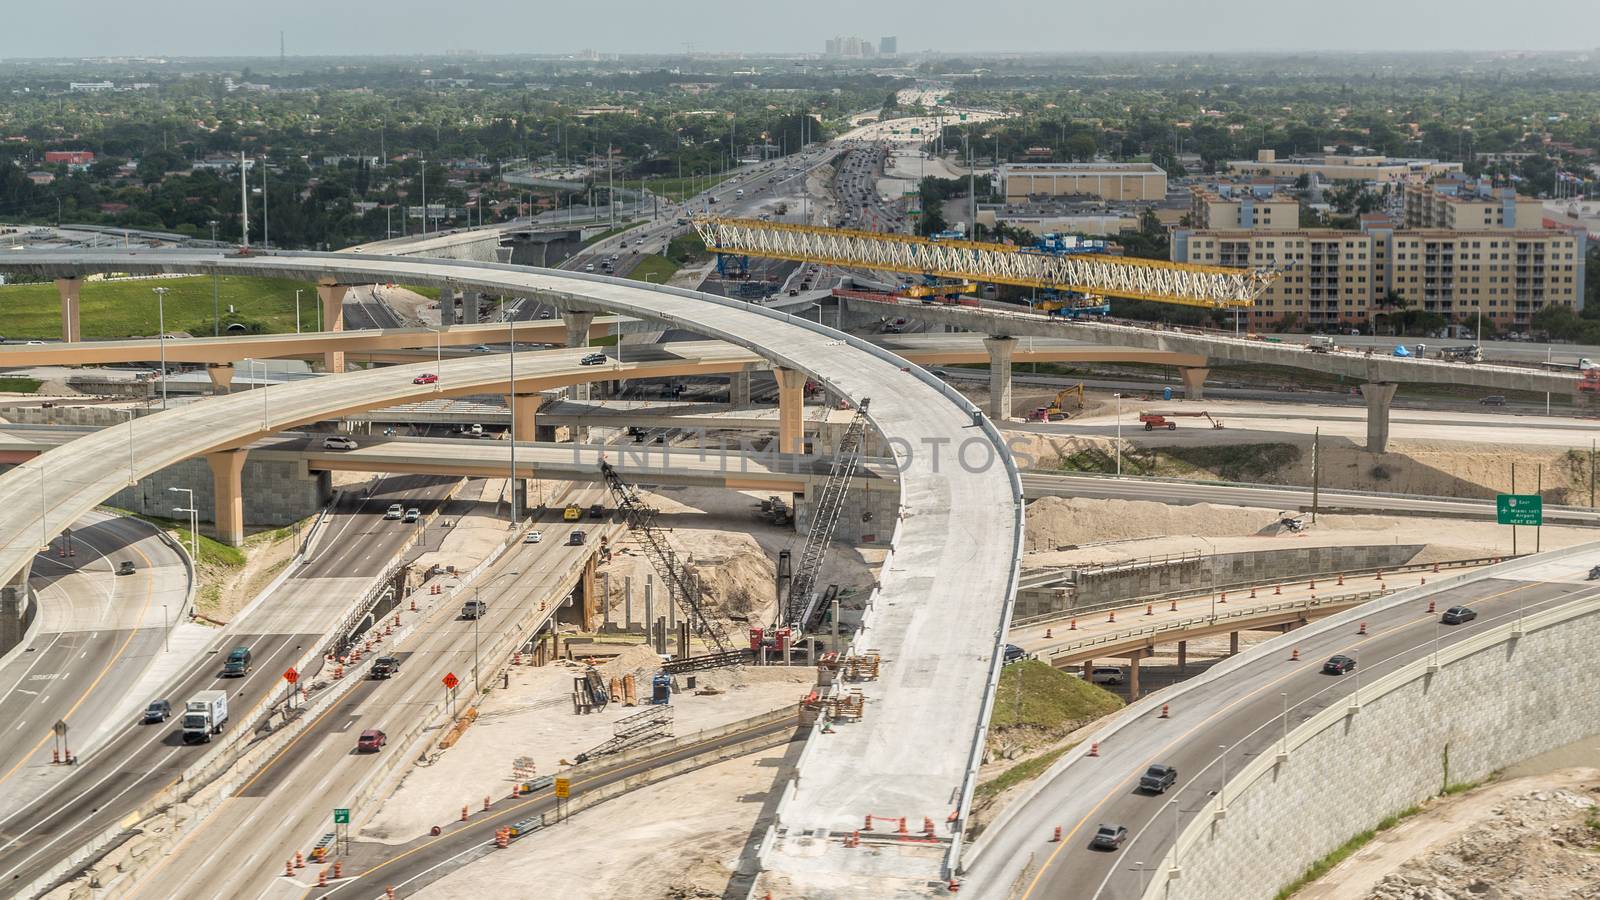 Heavy construction work getting underway on the highway system near Miami International Airport - August 2014